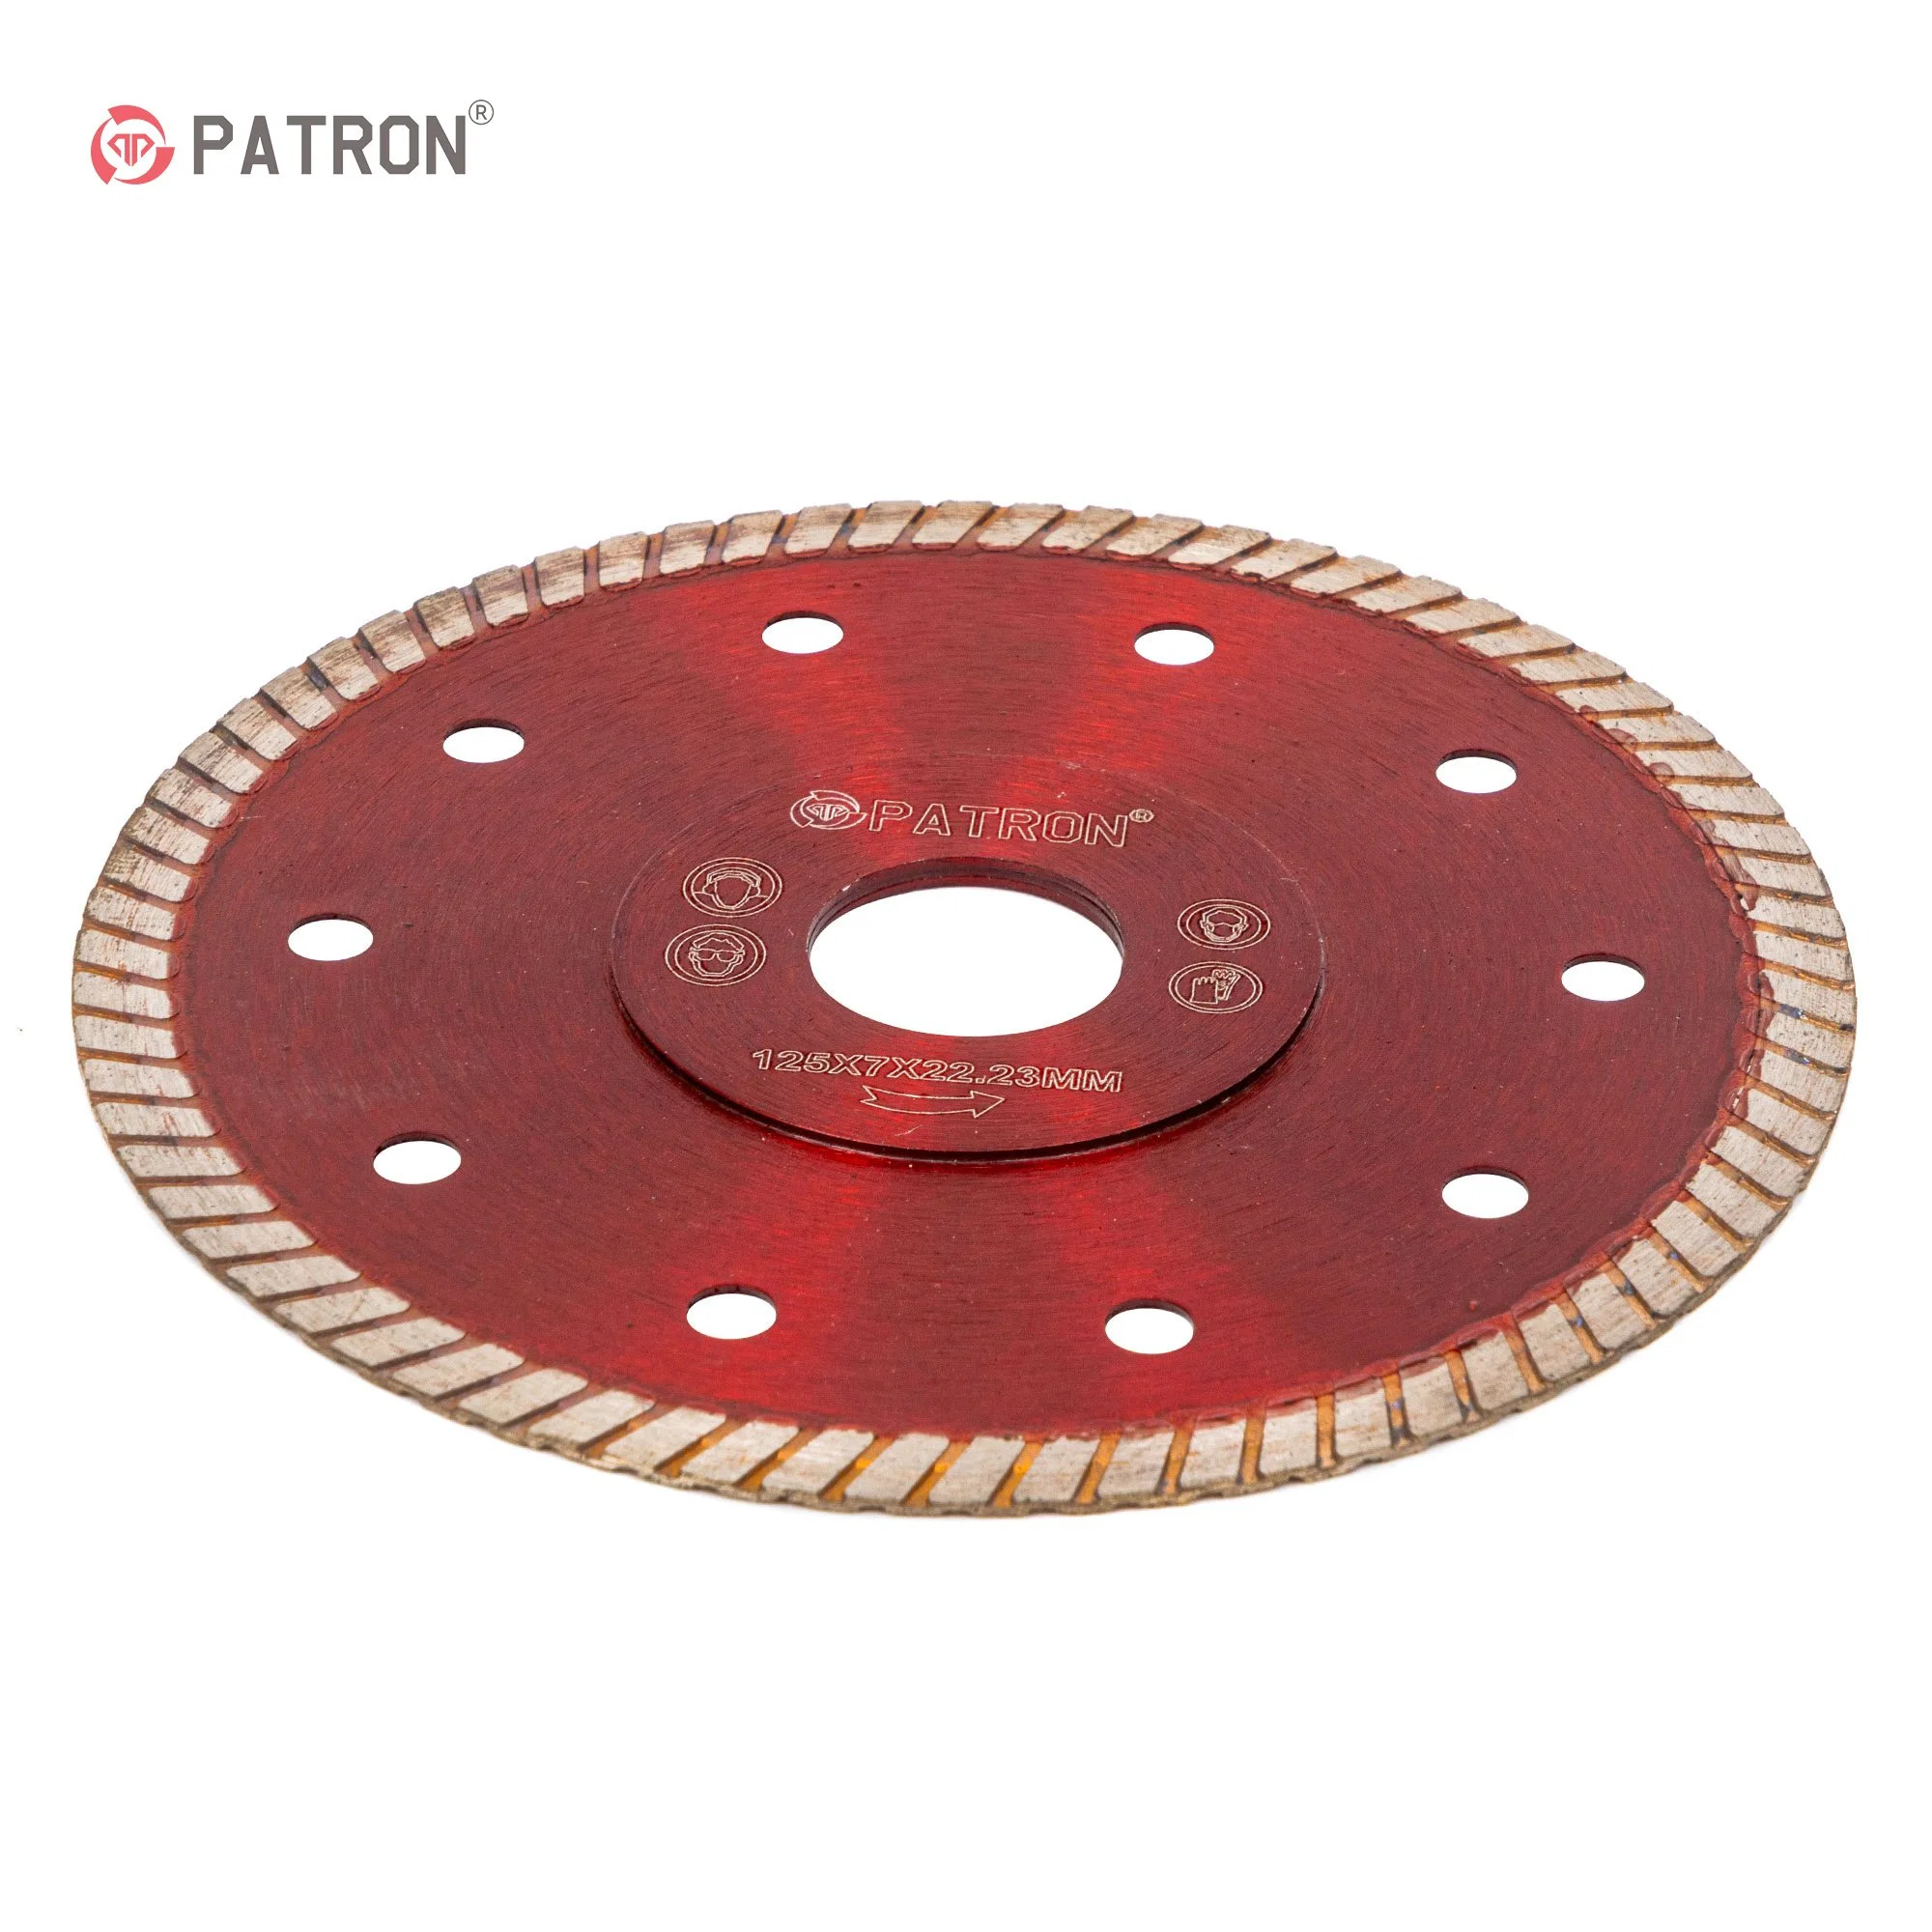 High Performance China 5 Inch Abrasive Metal Cutting Disc for Metal & Steel